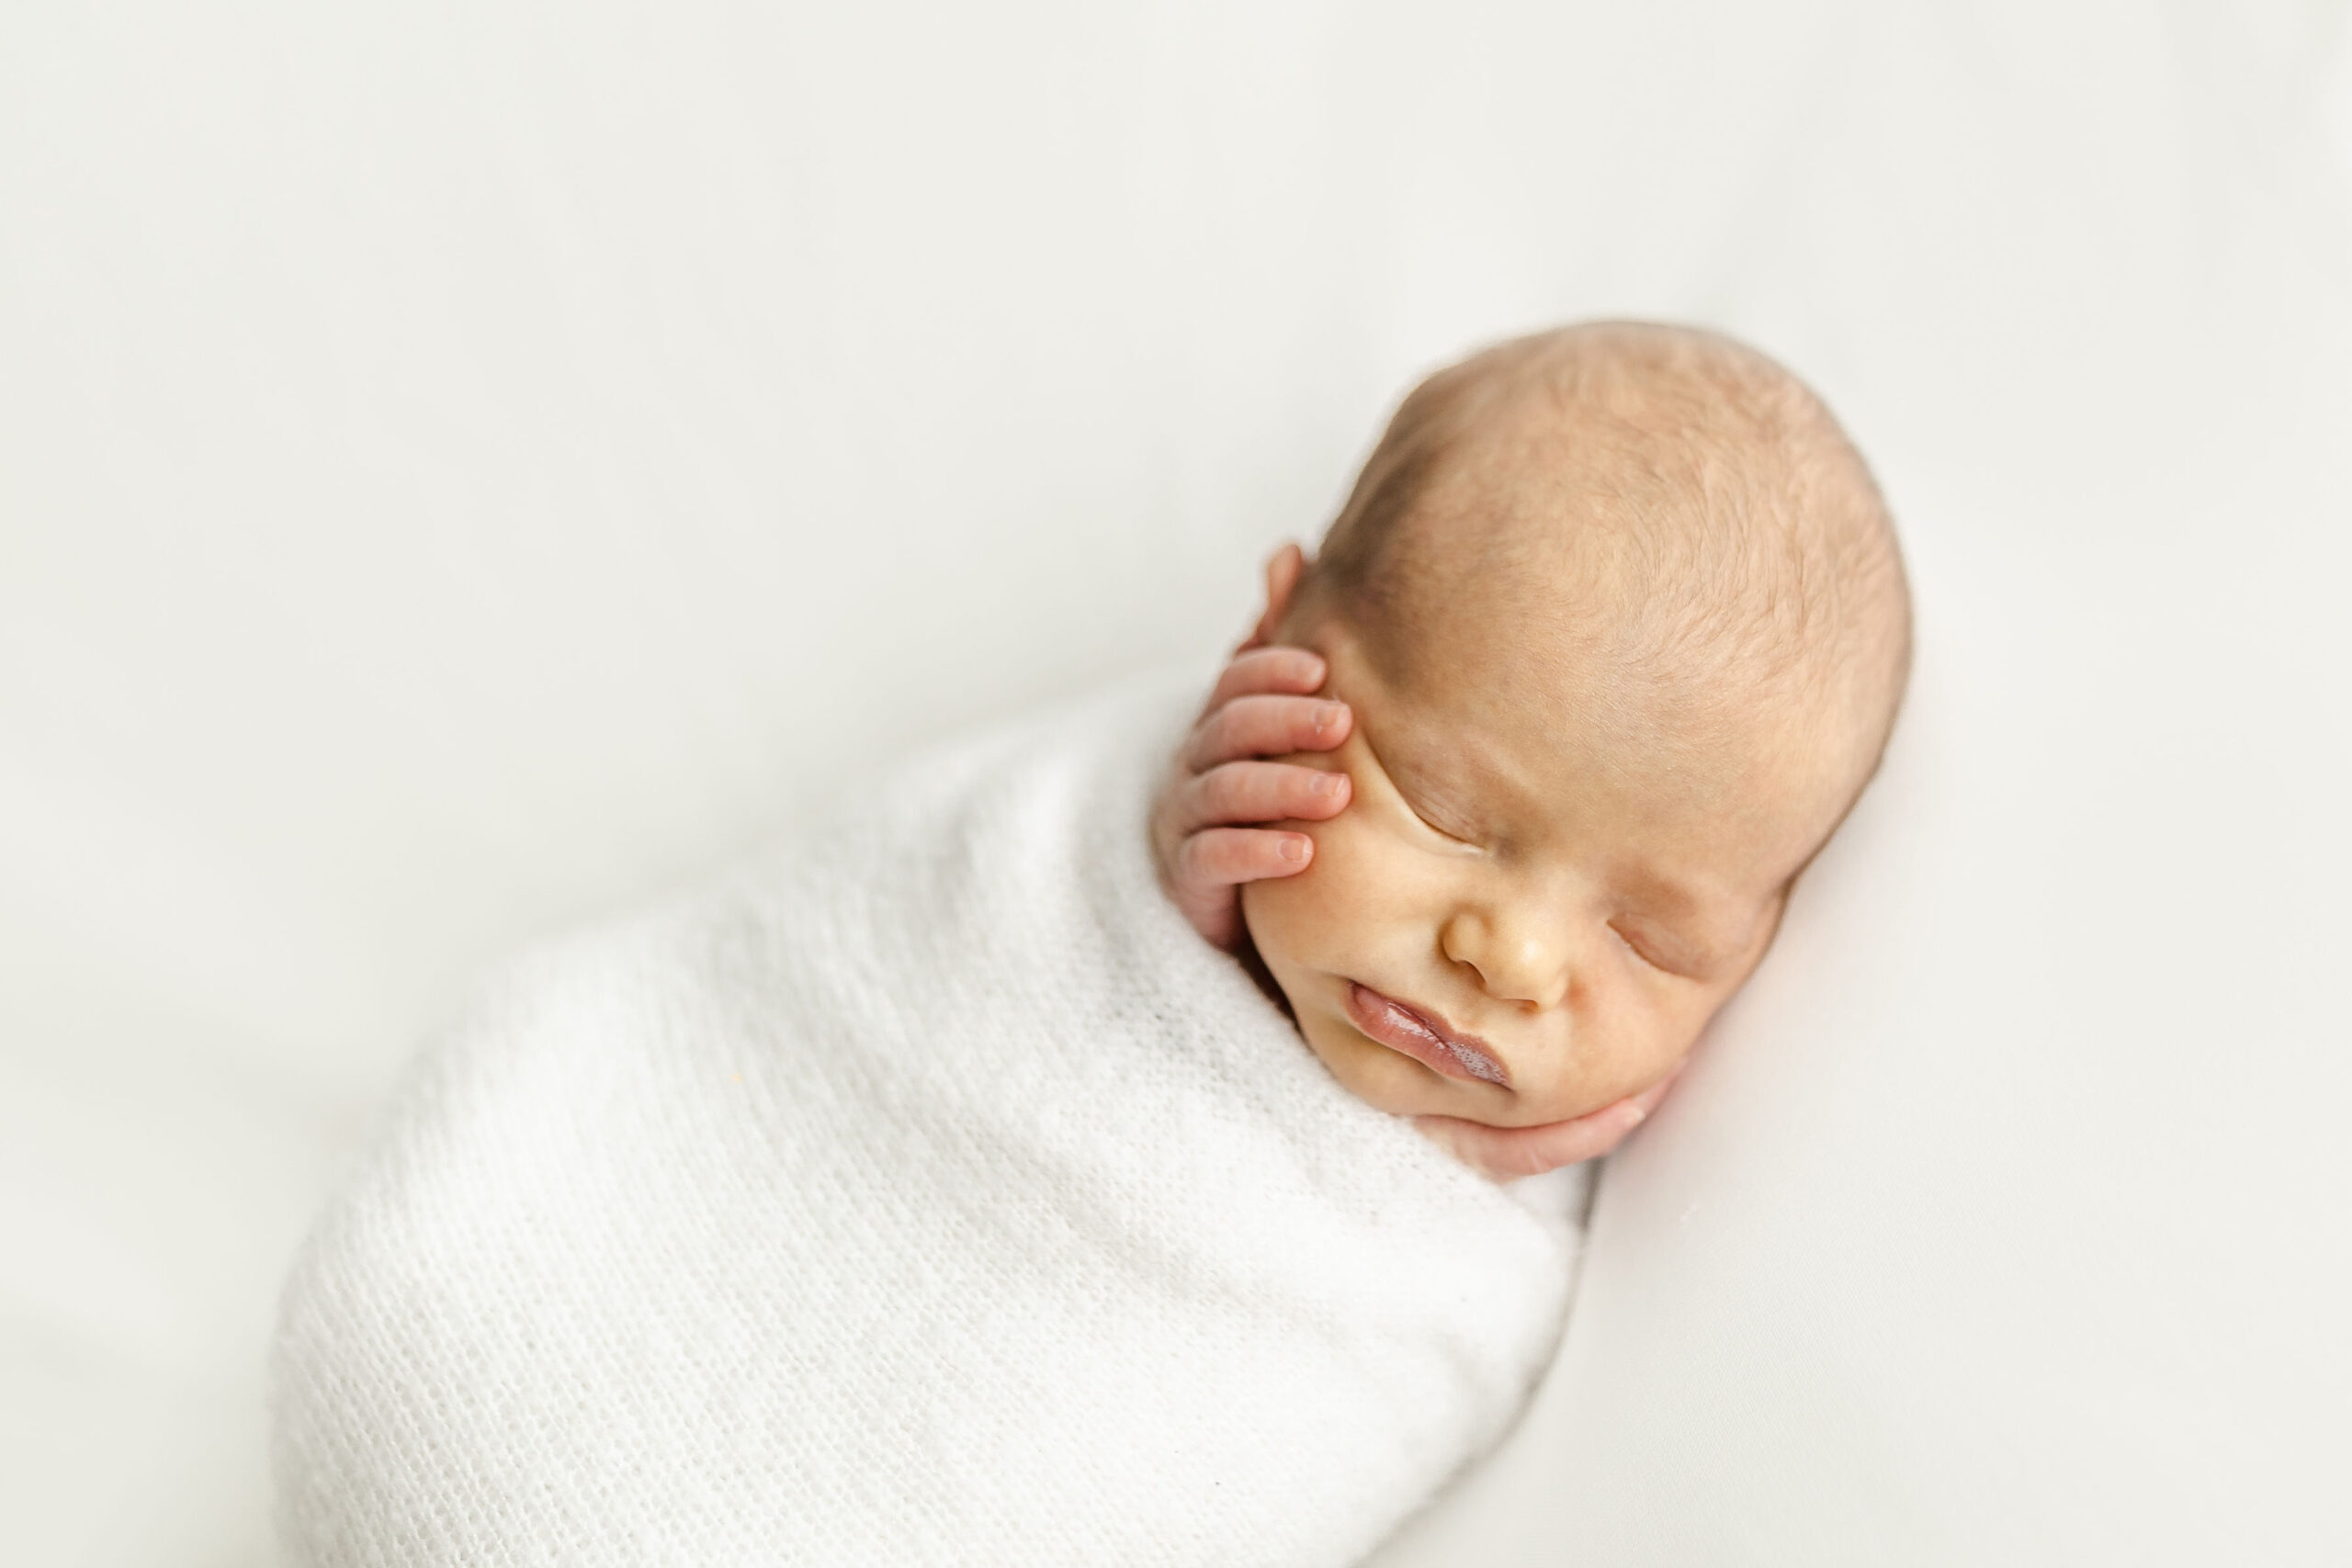 A newborn baby sleeps in a white swaddle with hands sticking out on its cheeks luna baby miami